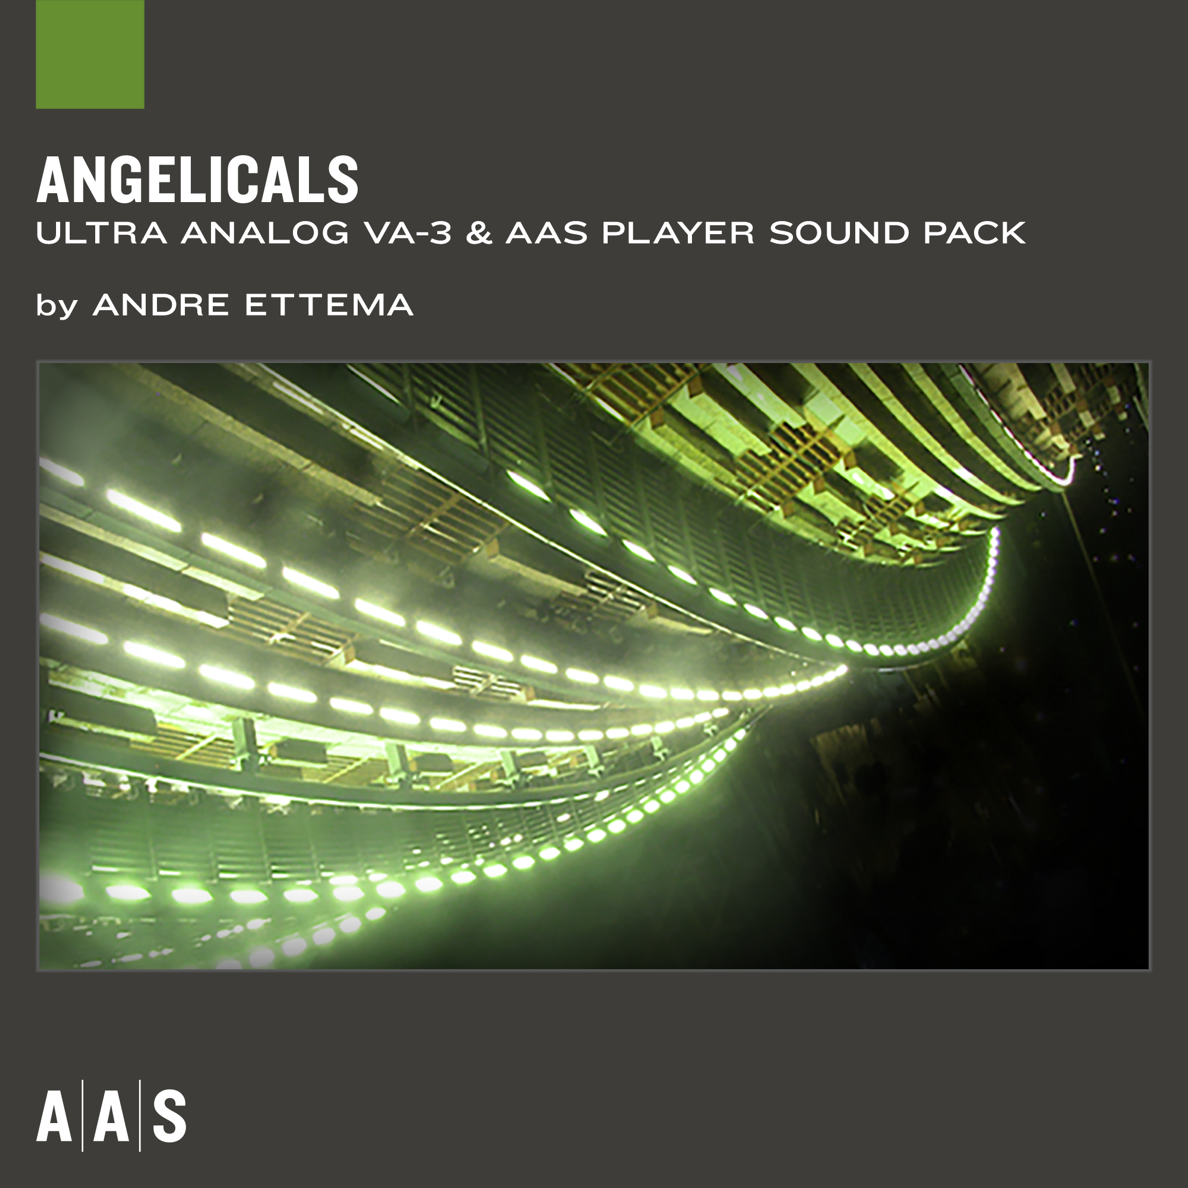 Ultra Analog and AAS Player sound pack ： Angelicals